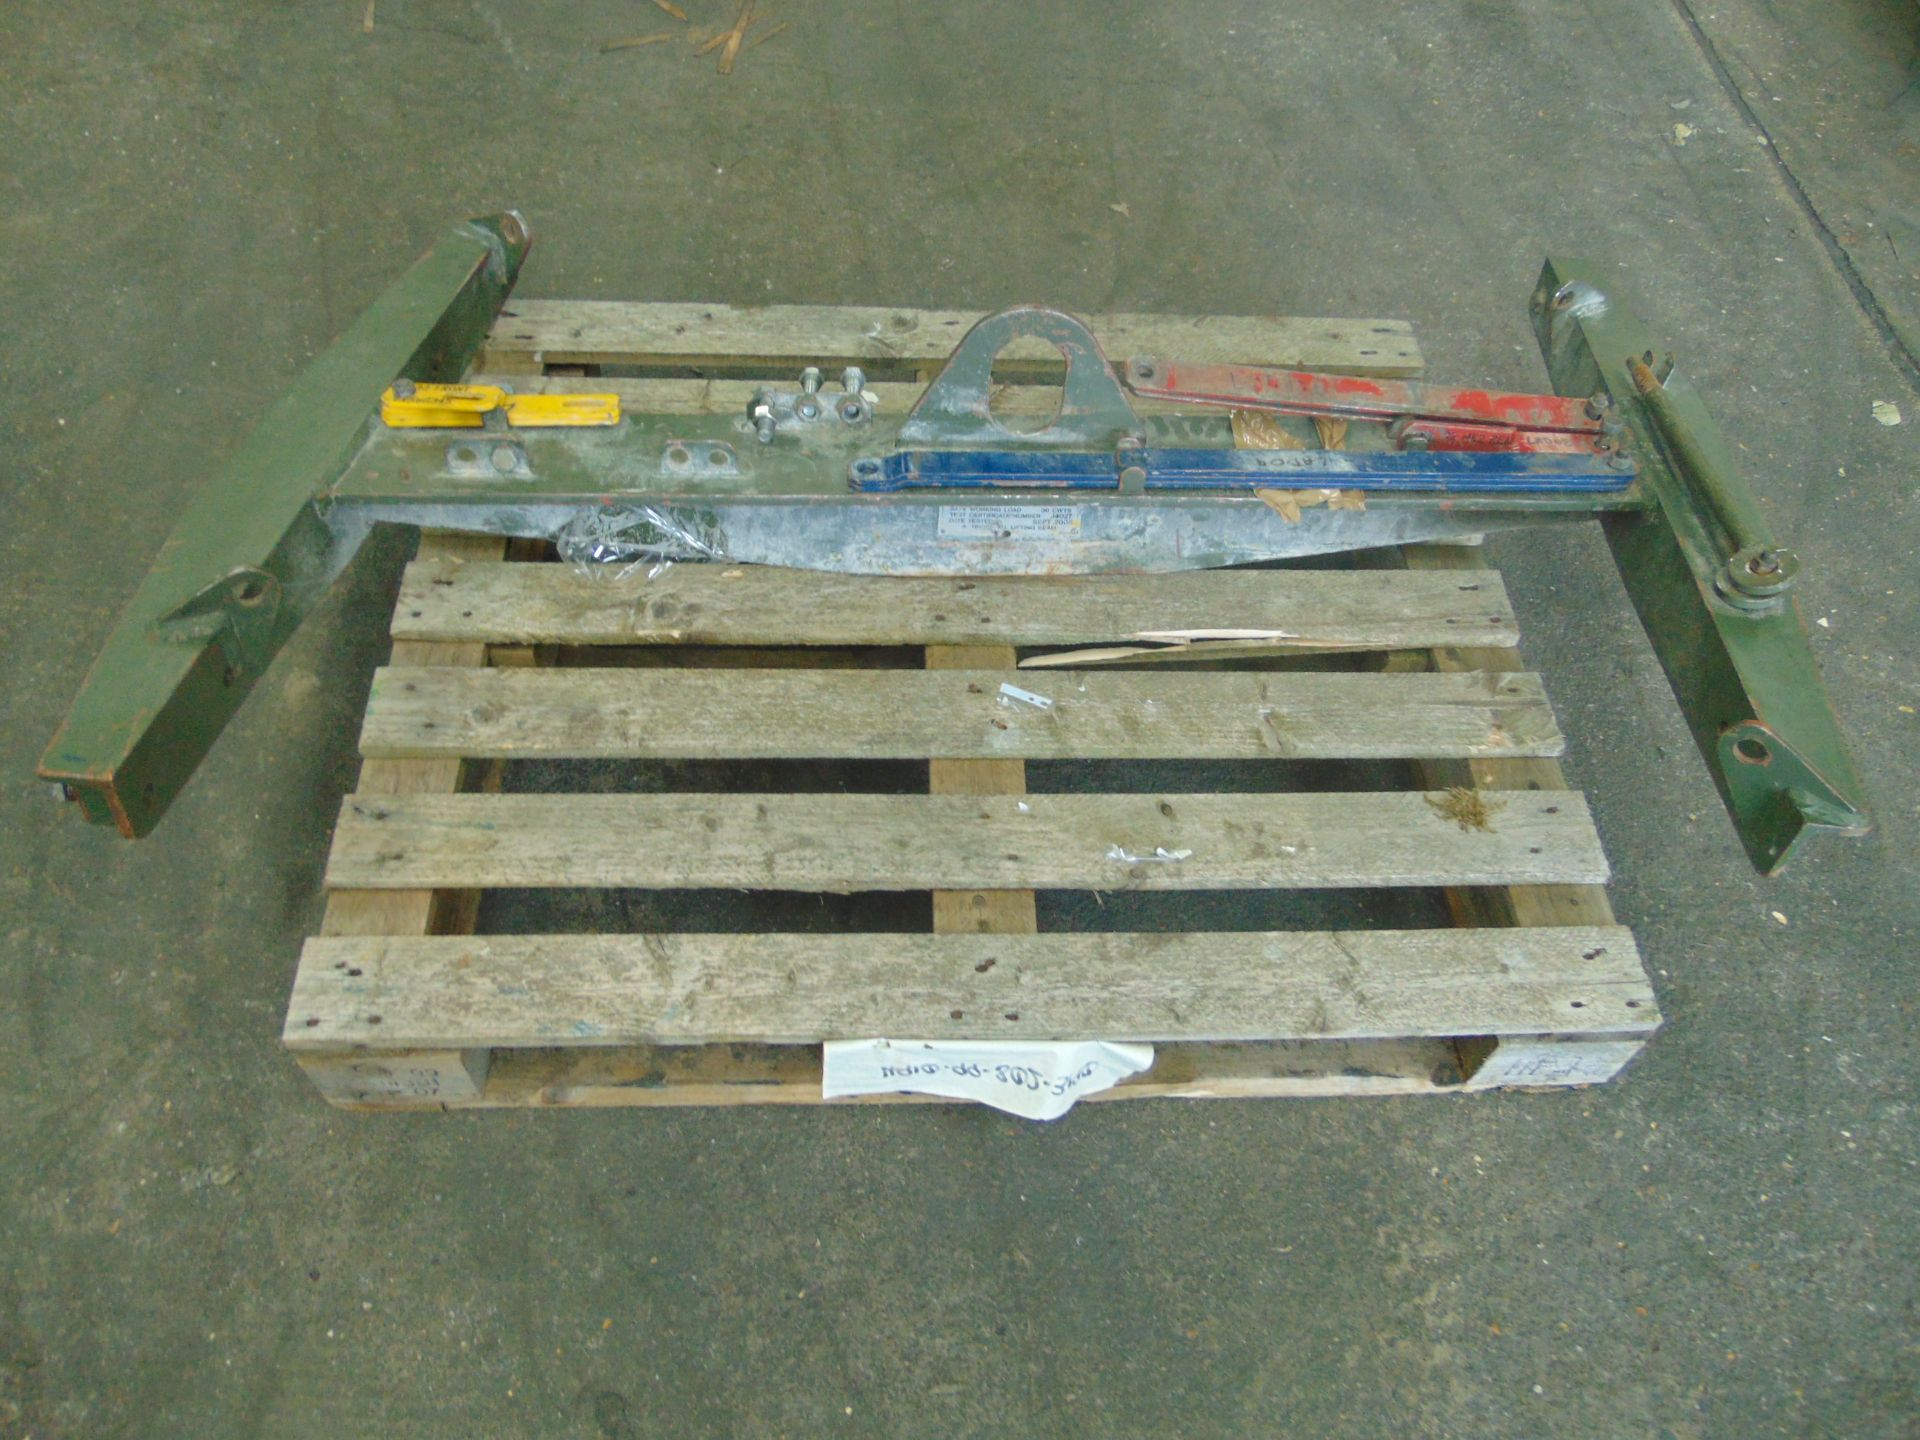 Extremely Rare Original FV432 Pack Lifting Frame Complete with Attachments